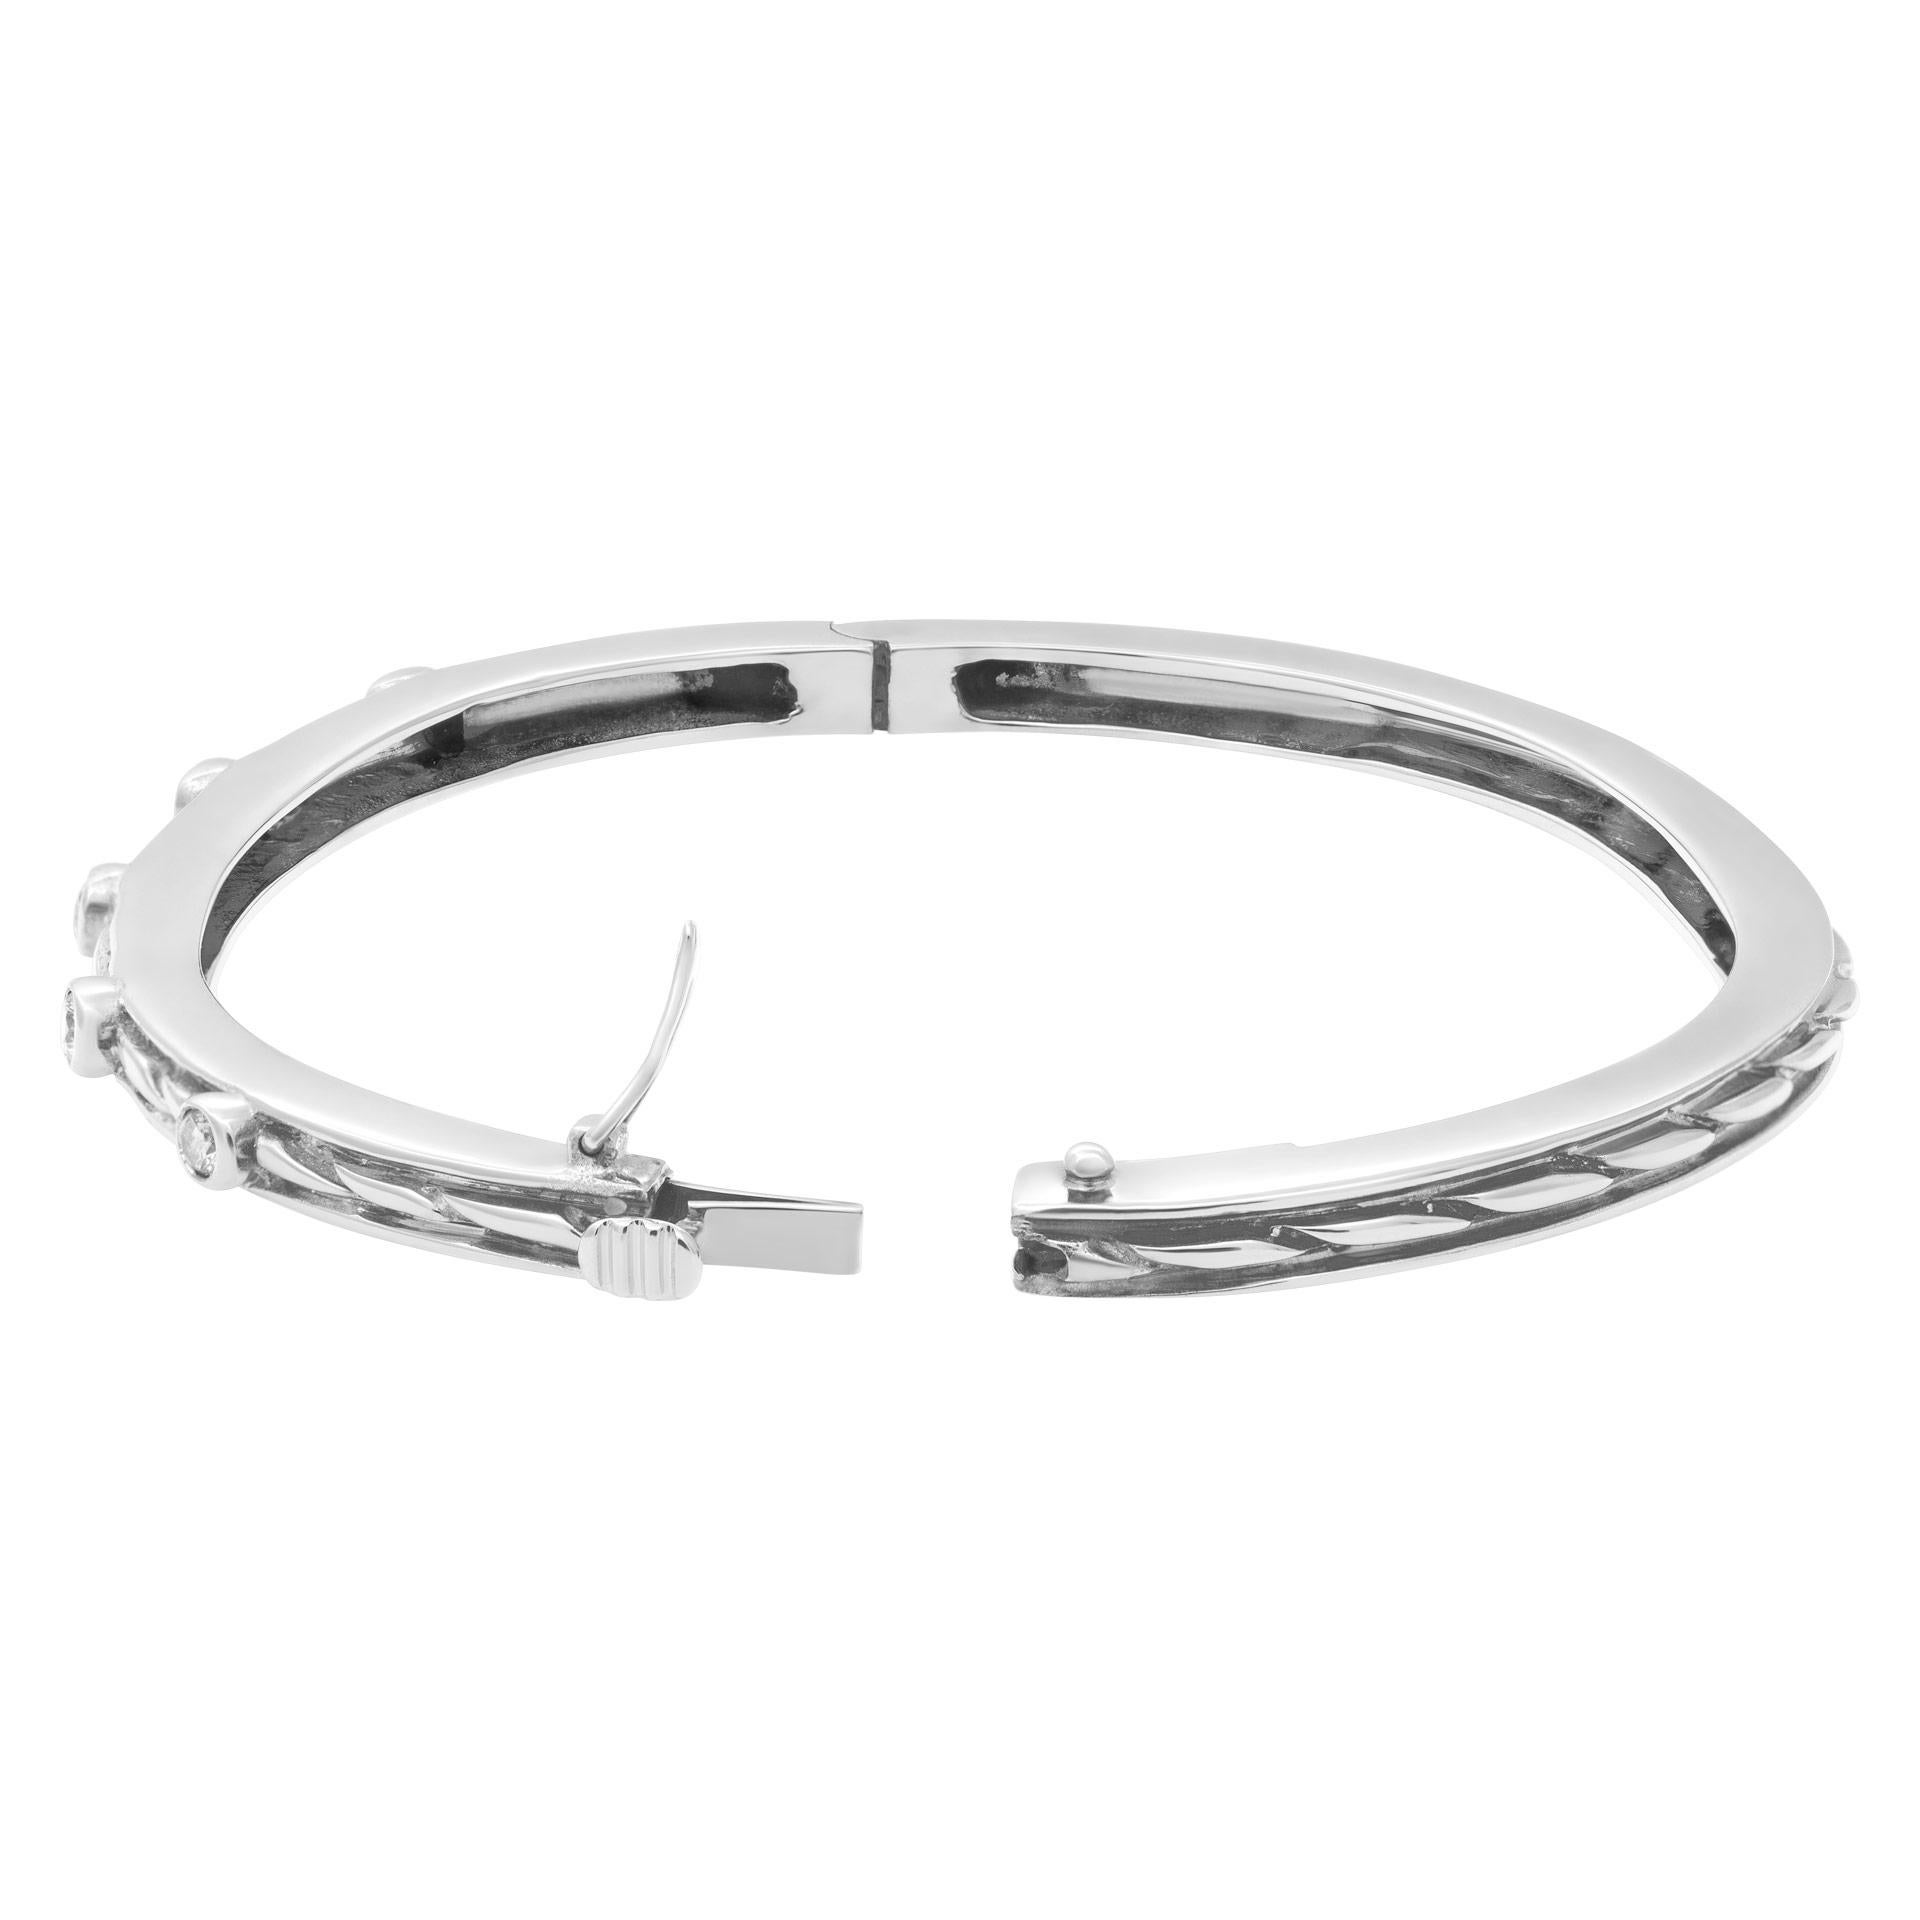 Bangle with Five Diamonds Total 0.50 Carats Set in 14k White Gold In Excellent Condition For Sale In Surfside, FL